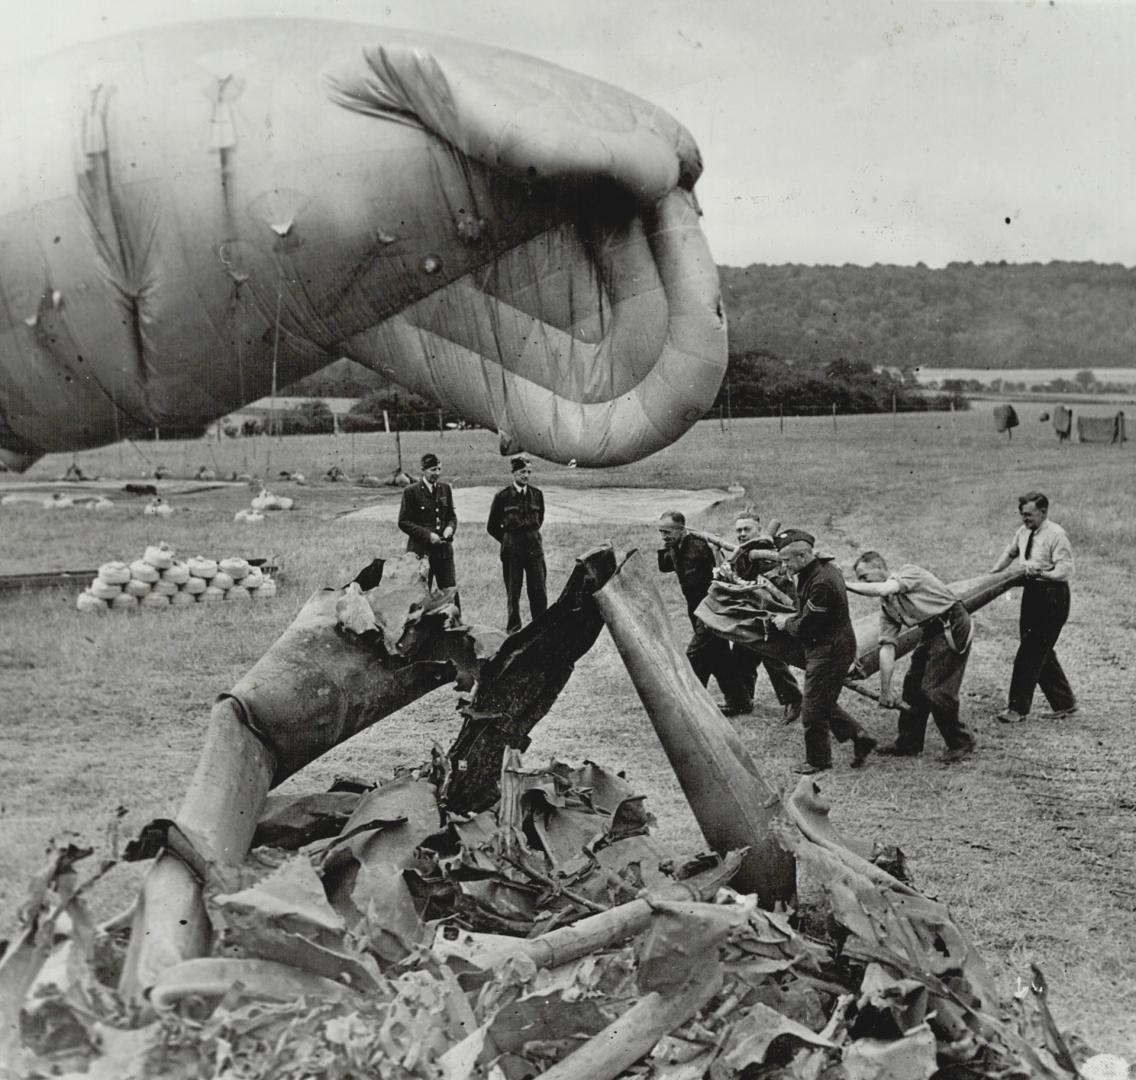 R.a.f. Men work together to pile parts of many flying bombs brought down by large balloon defences